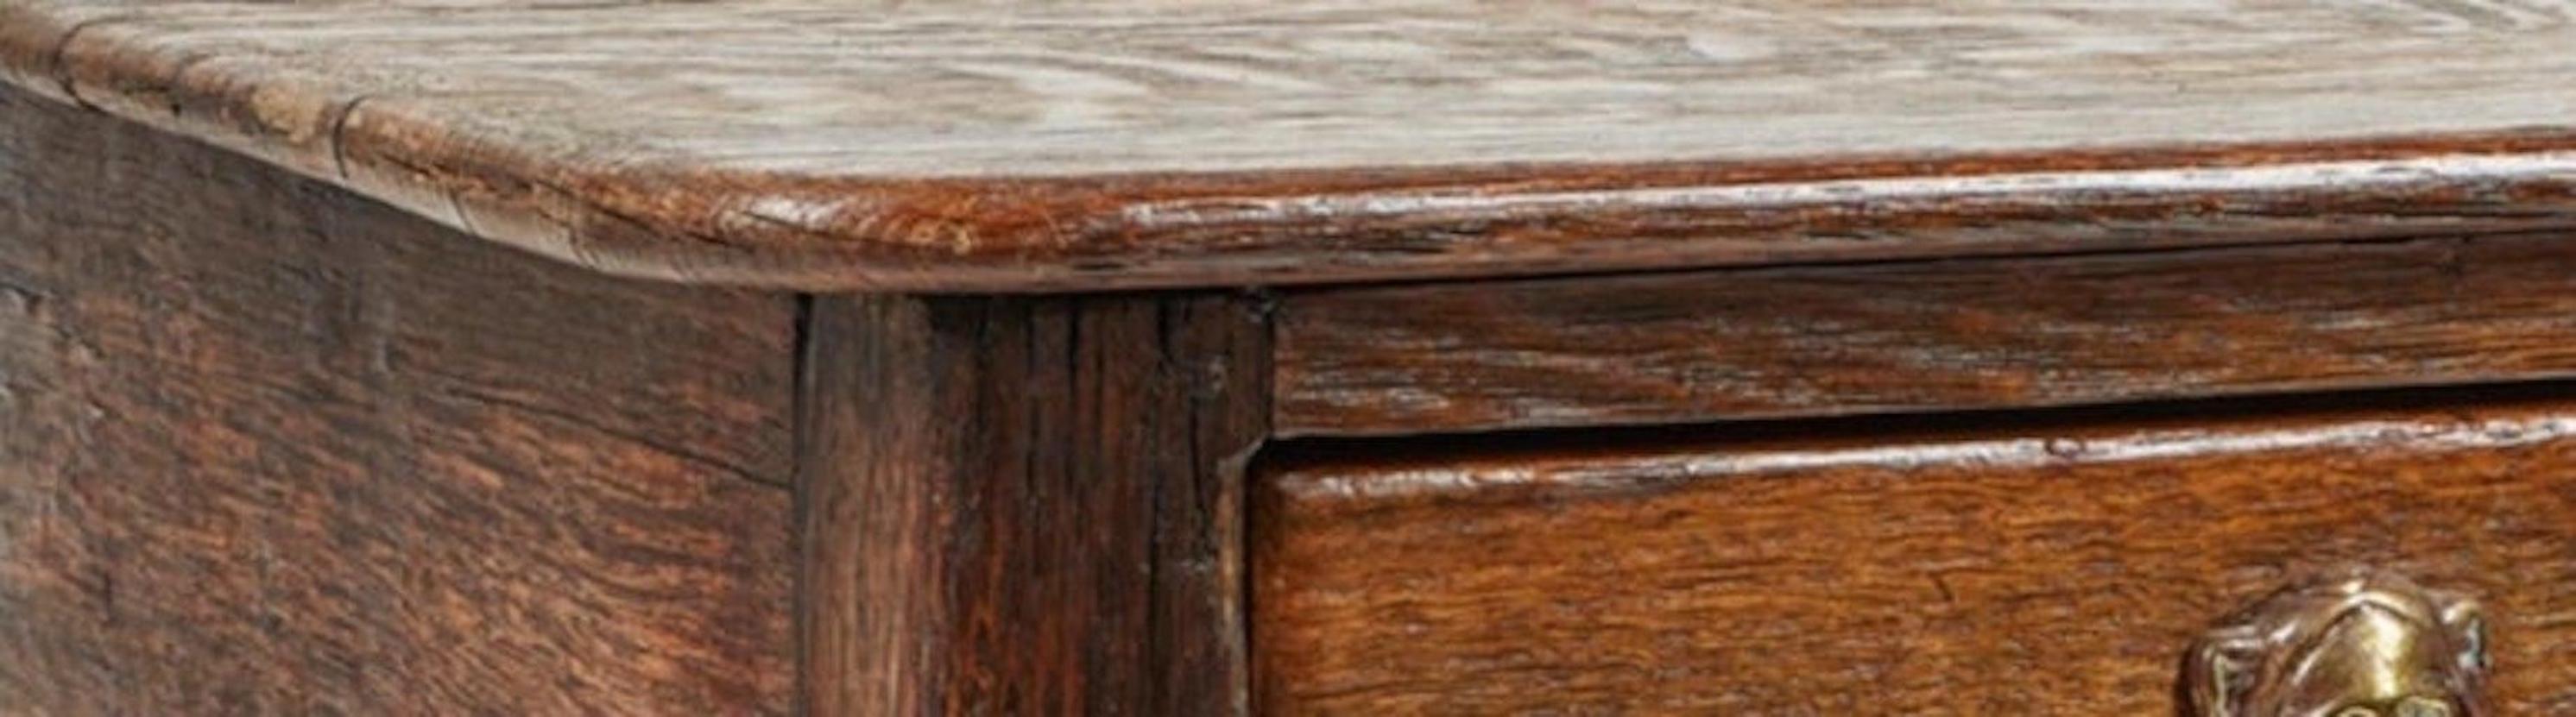 Oak Elegant Early 18th c. Side Table with Scalloped Apron